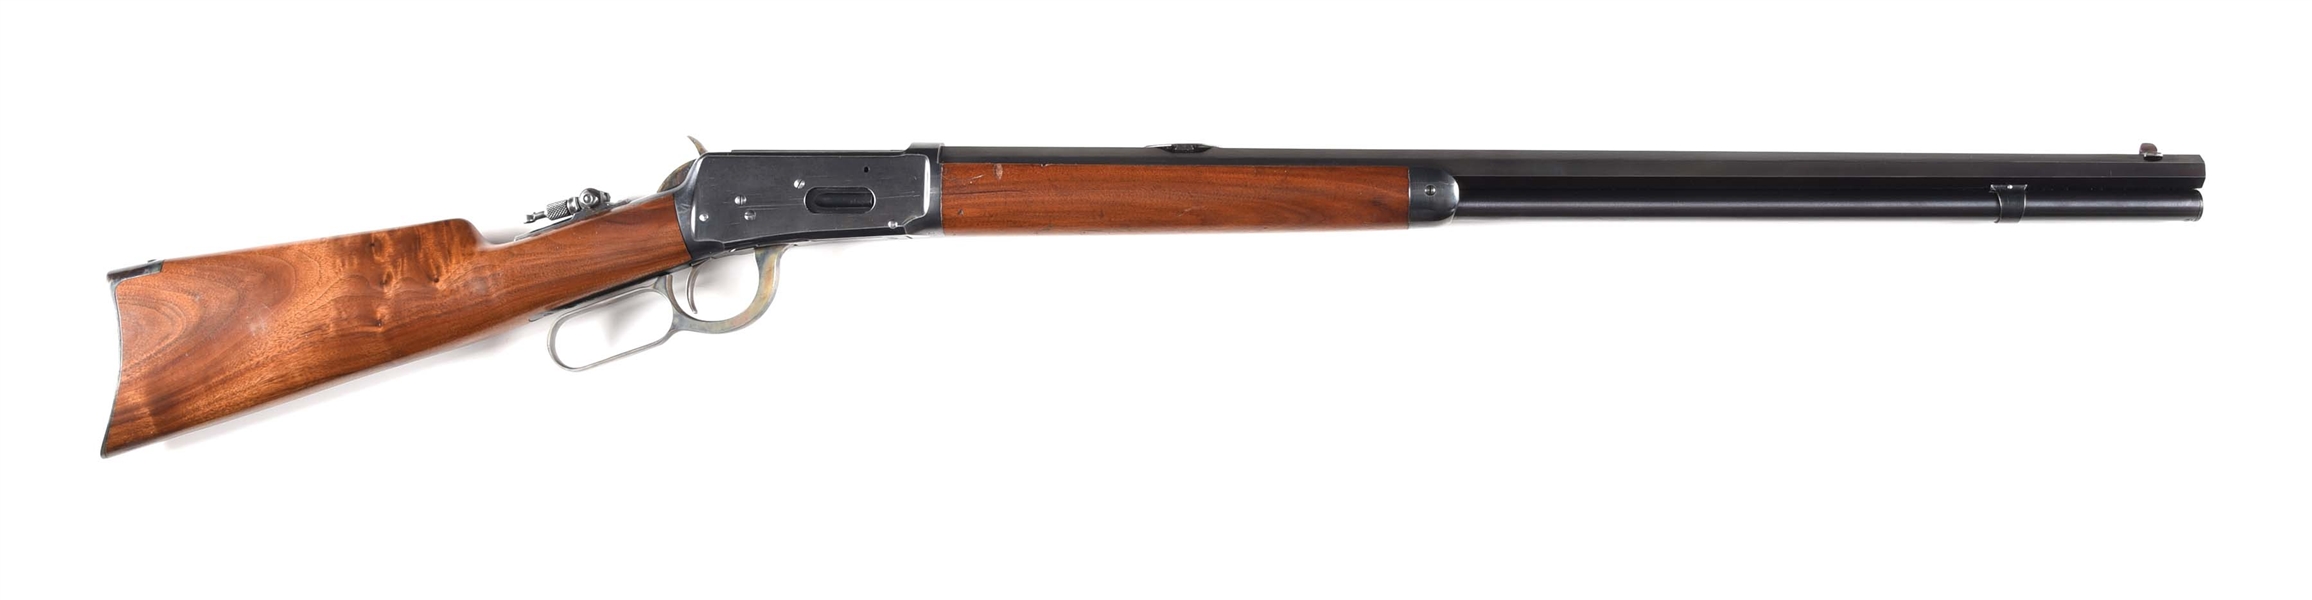 (A) FIRST YEAR PRODUCTION WINCHESTER MODEL 1894 LEVER ACTION RIFLE.